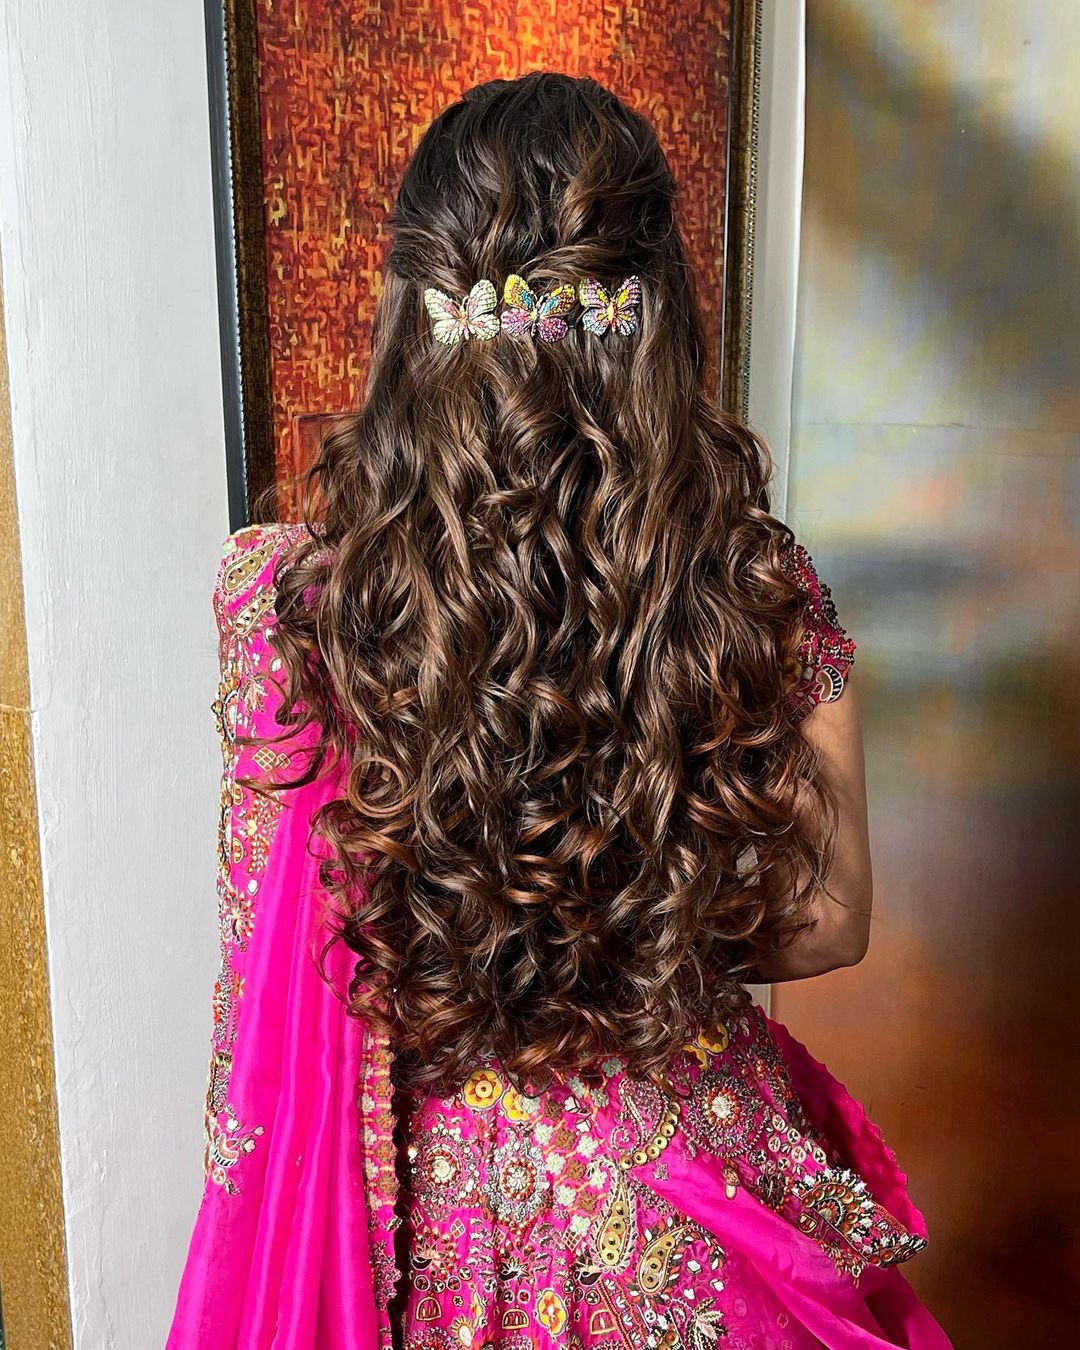 17 bridal hairstyles inspired by Bollywood brides to add to your mood board  | Vogue India